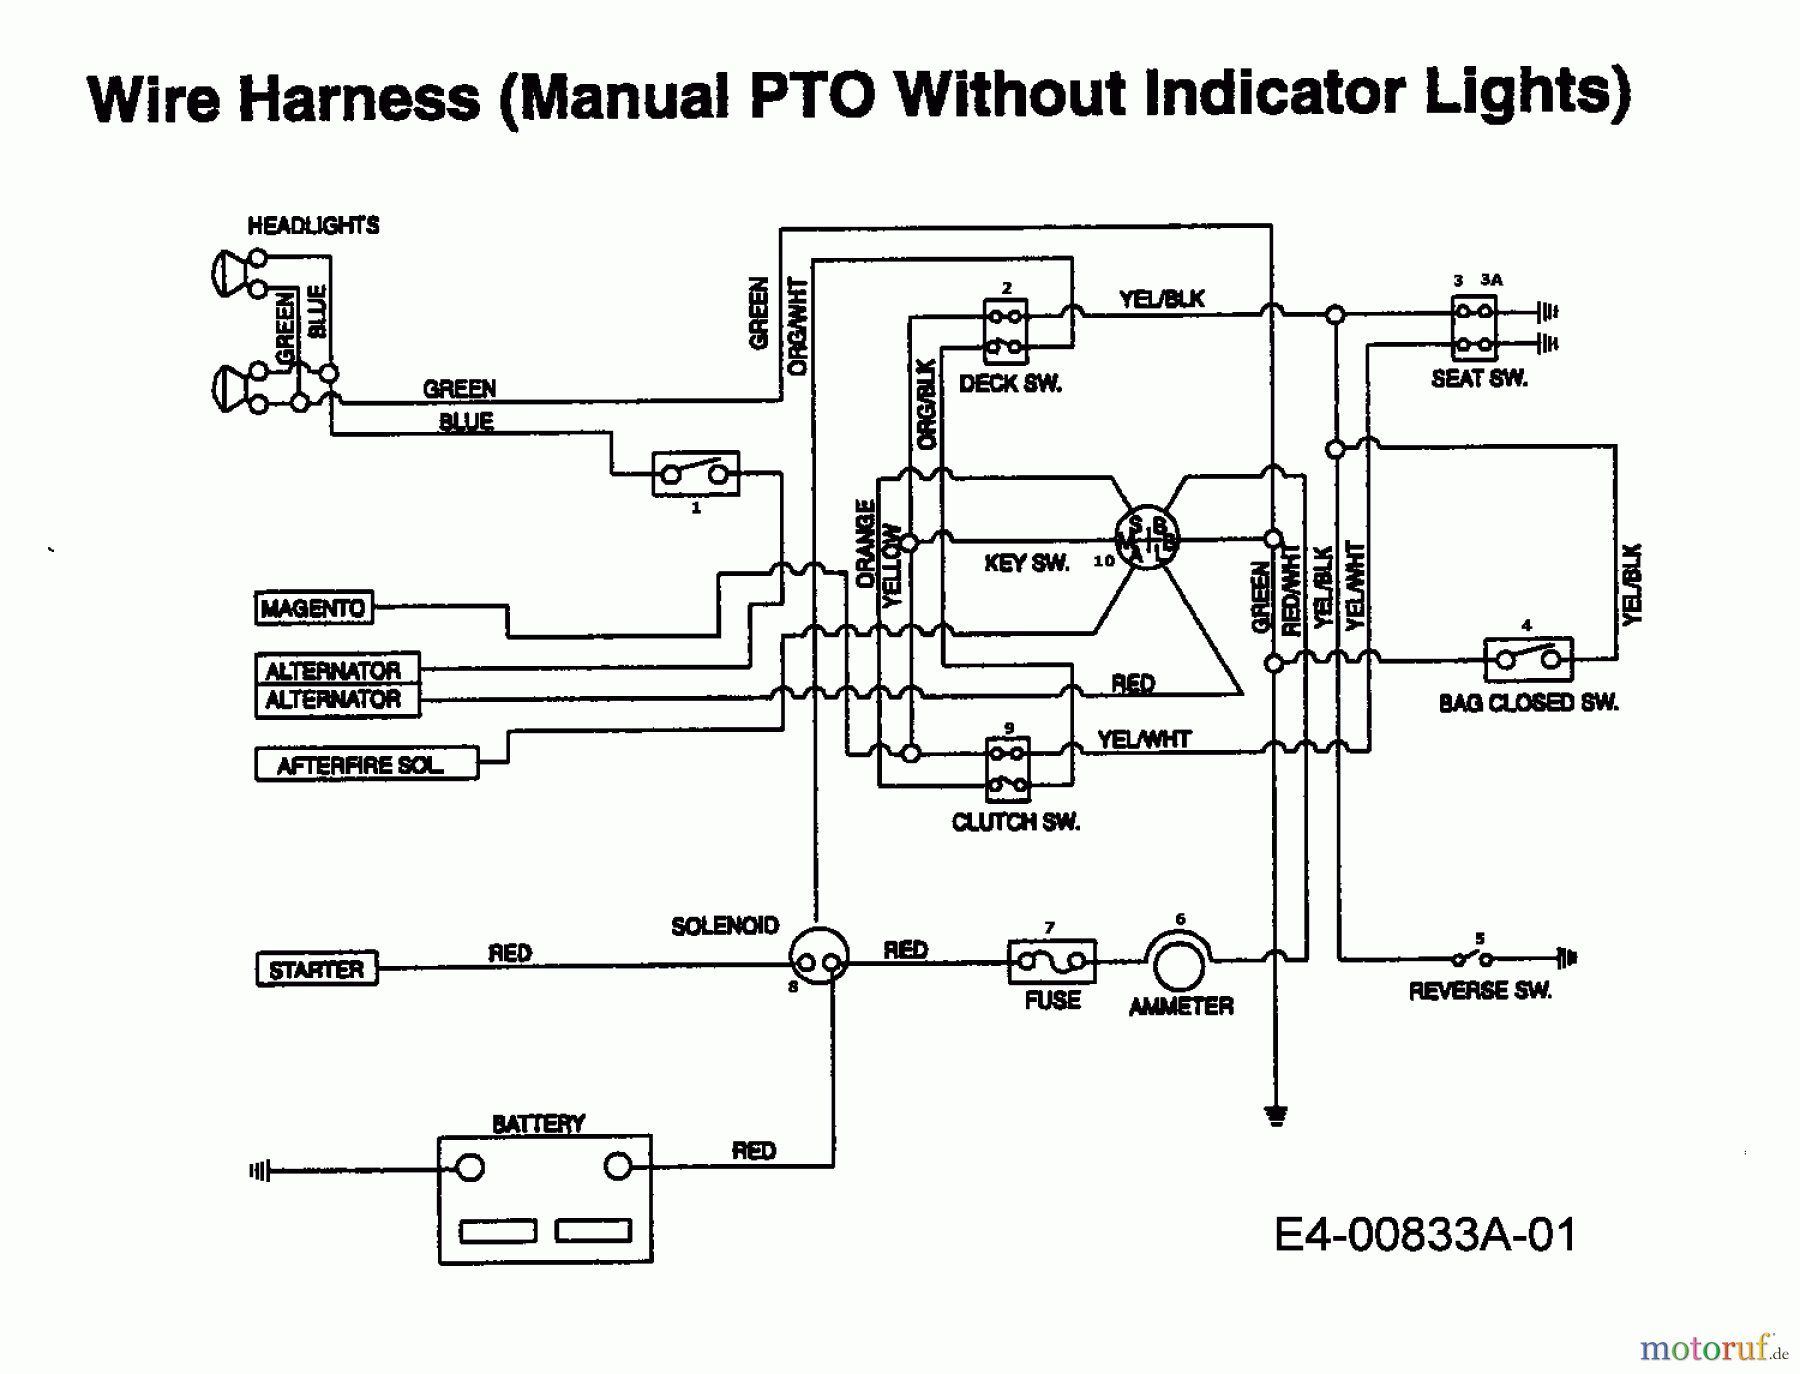  Mastercut Lawn tractors 155/102 H 13AD791N659  (1997) Wiring diagram without indicator lights